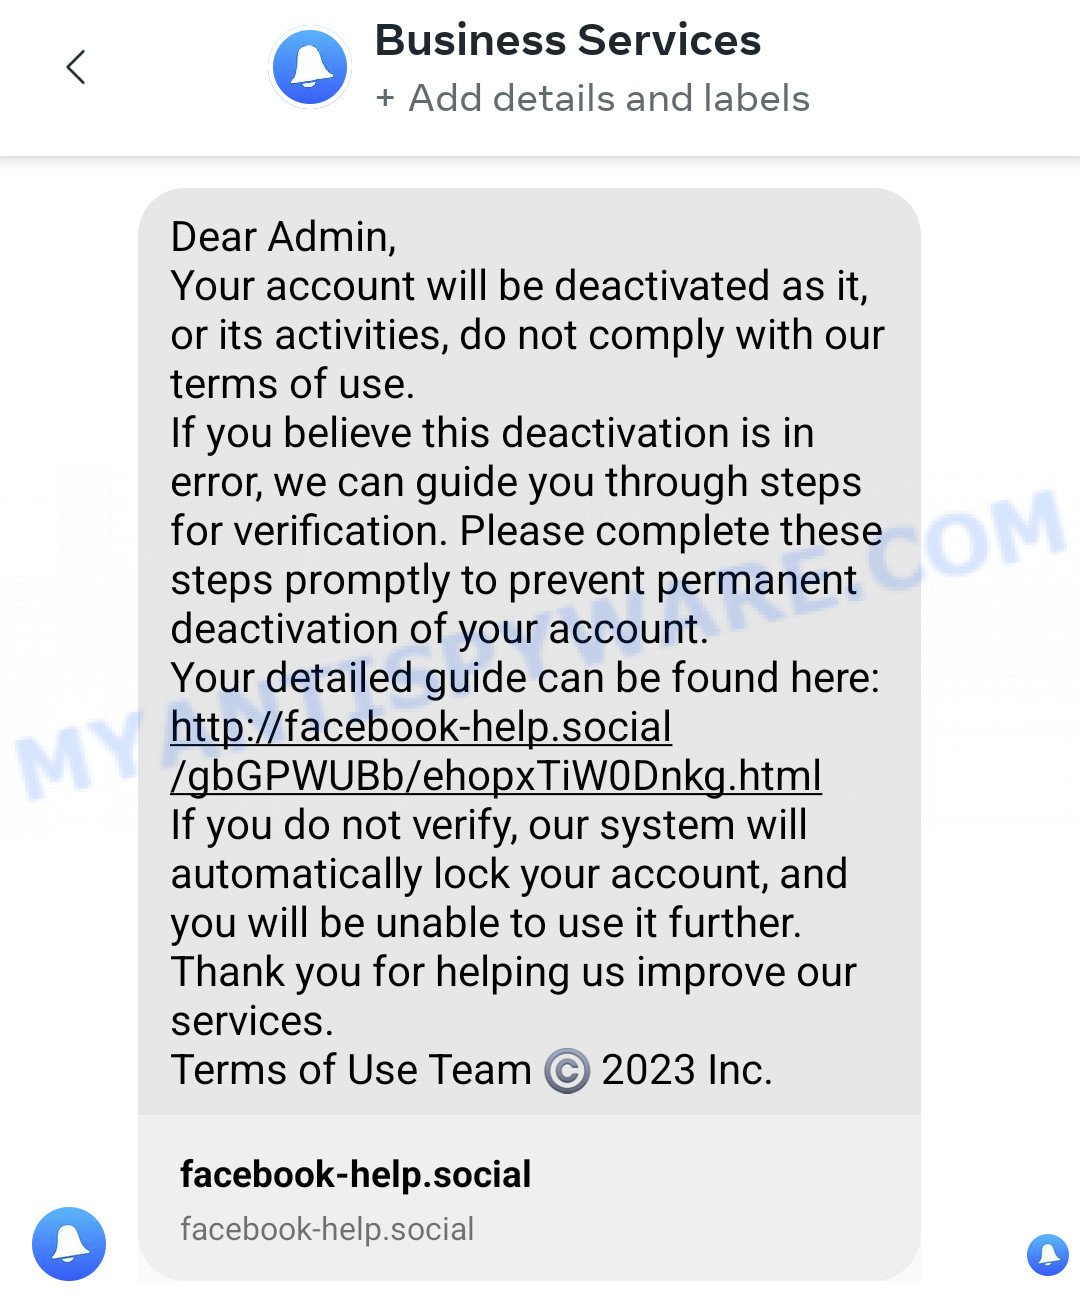 Meta Business Suite Scam Your account will be deactivated message